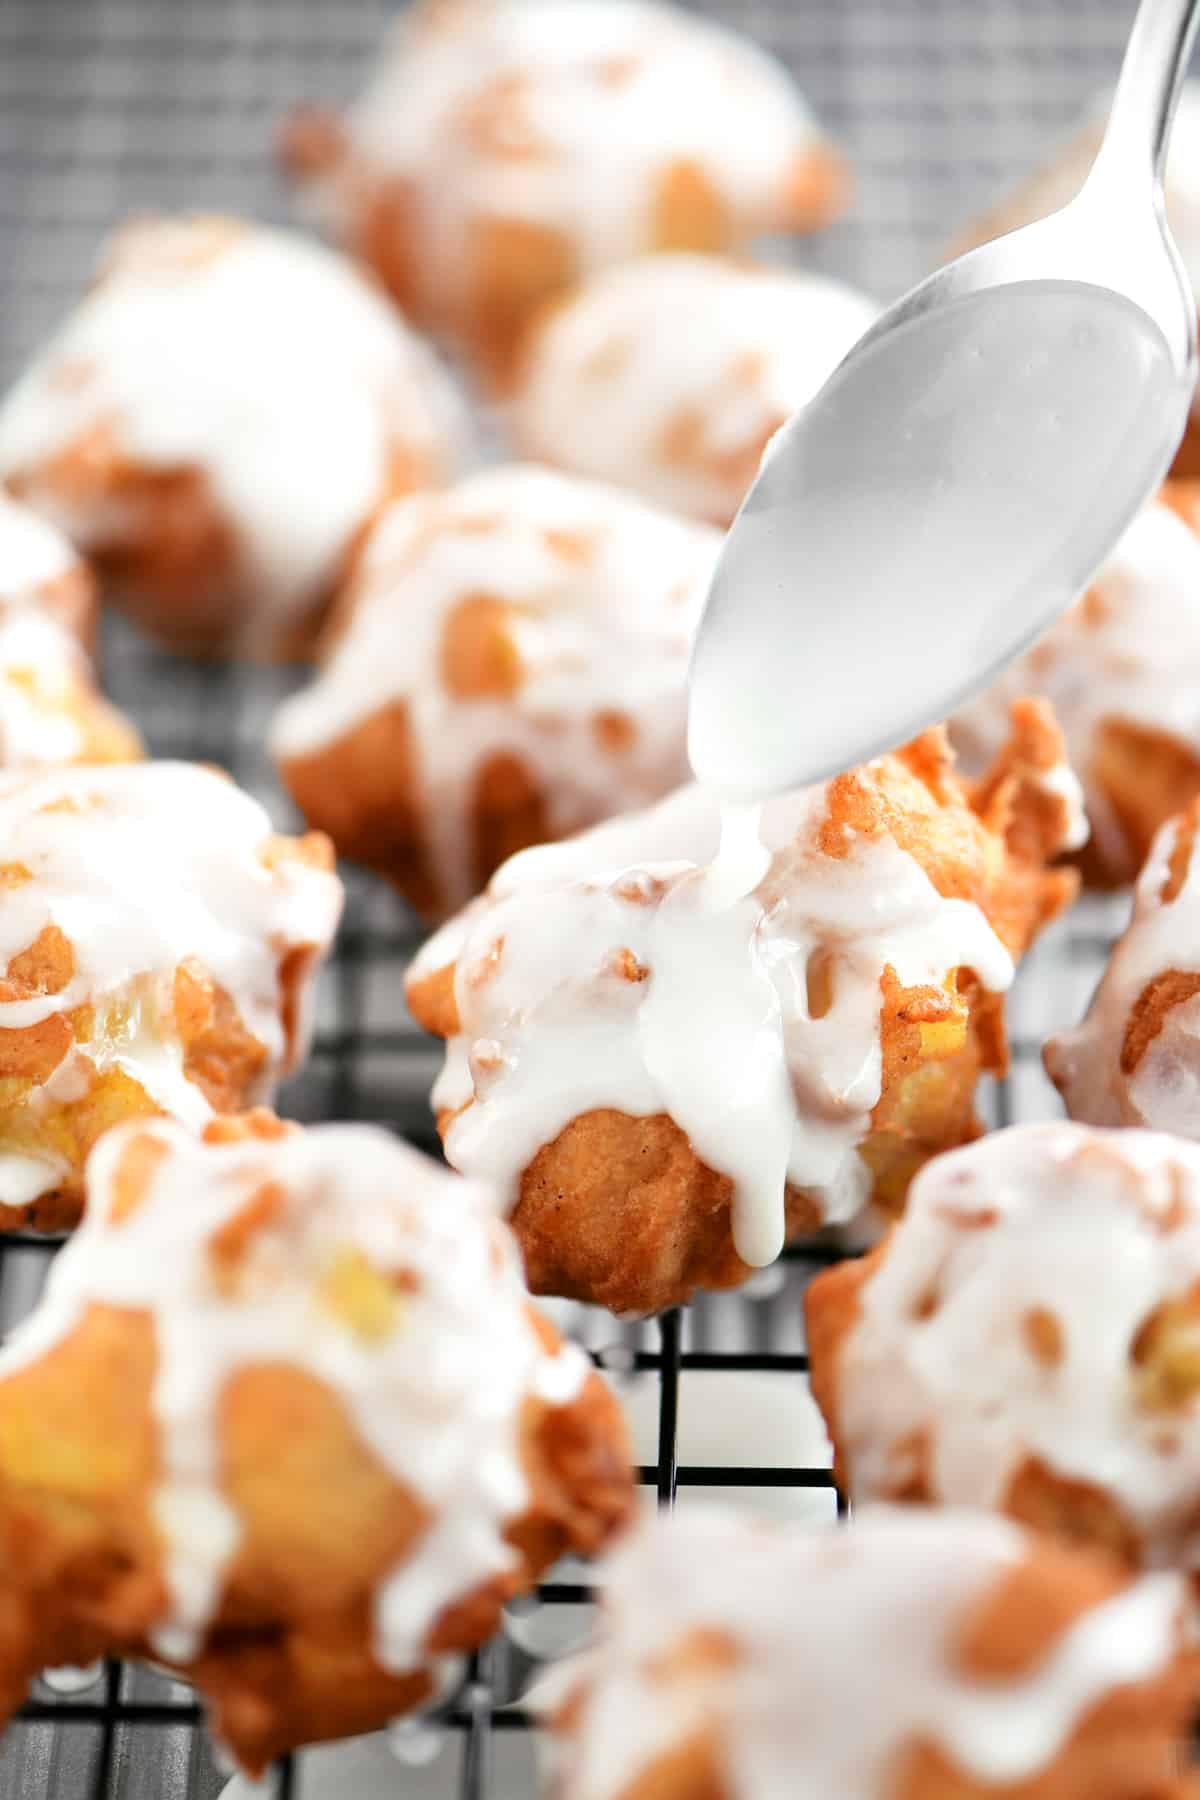 A spoon drizzling powdered sugar glaze on apple fritters.